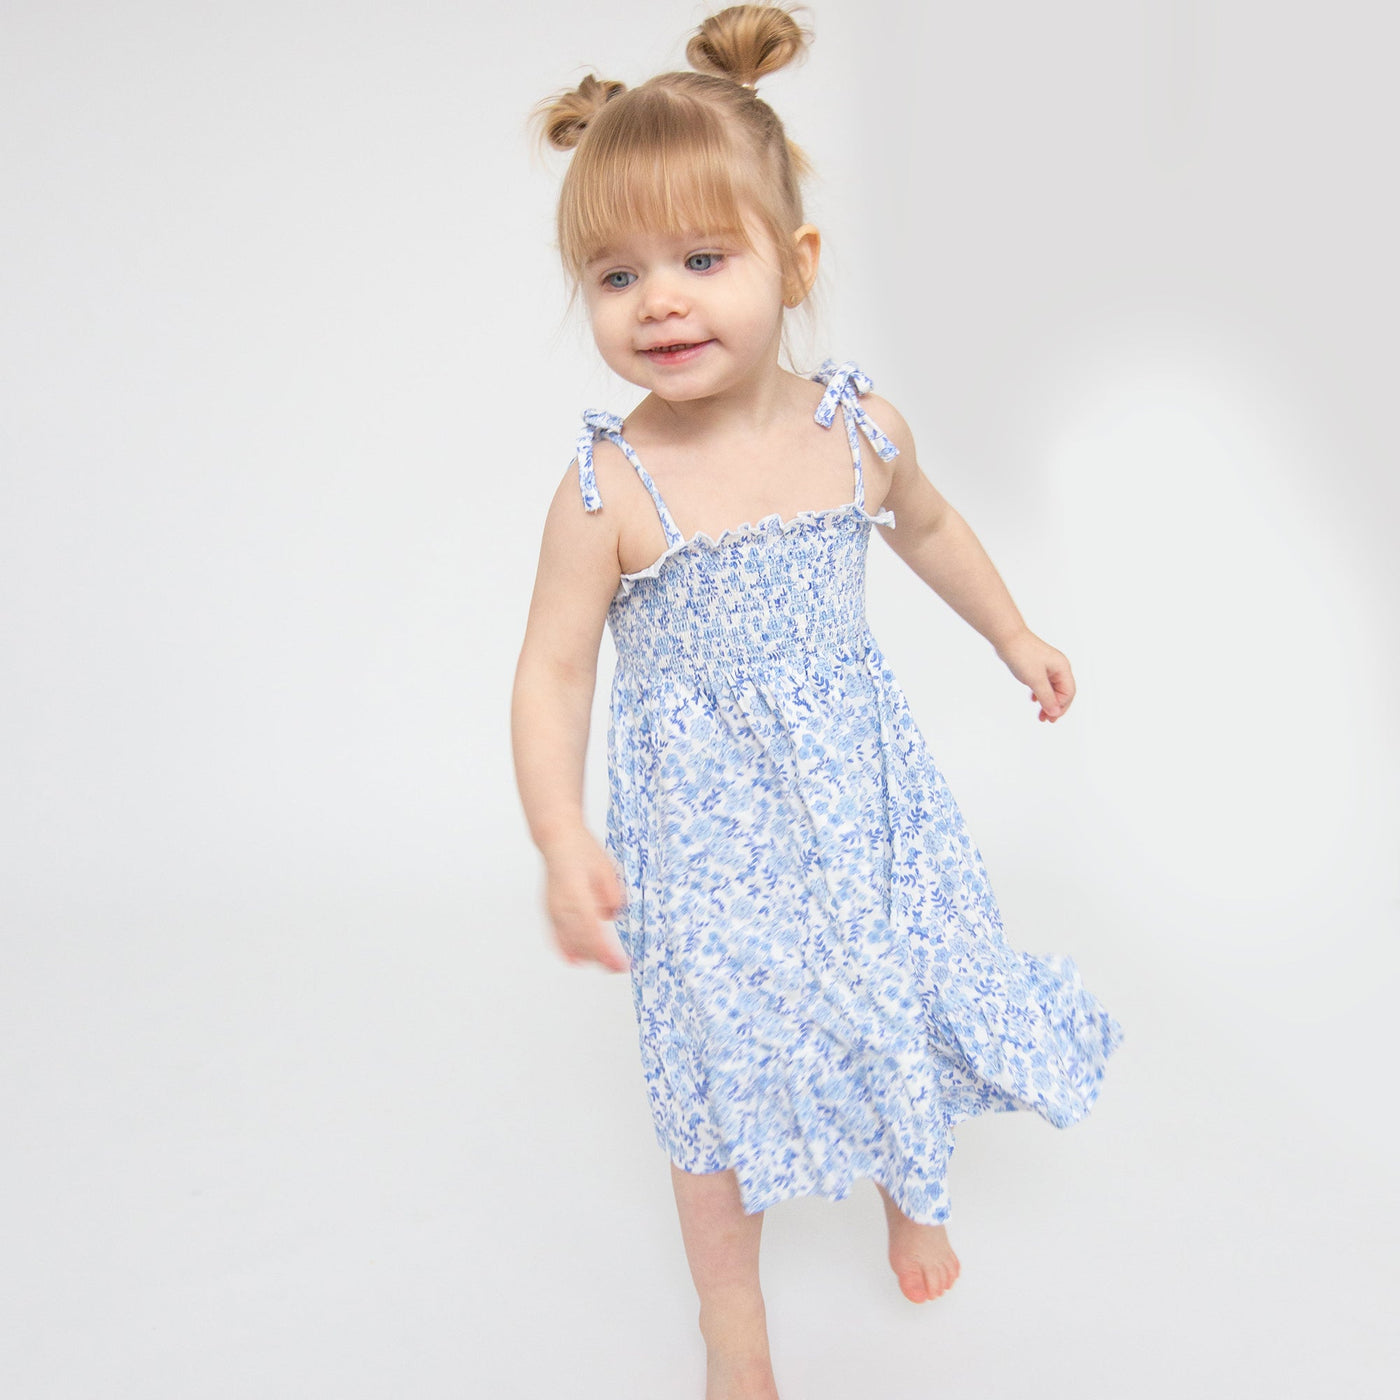 Tie Strap Smocked Sun Dresss Diaper Cover - Blue Calico Floral - Angel Dear